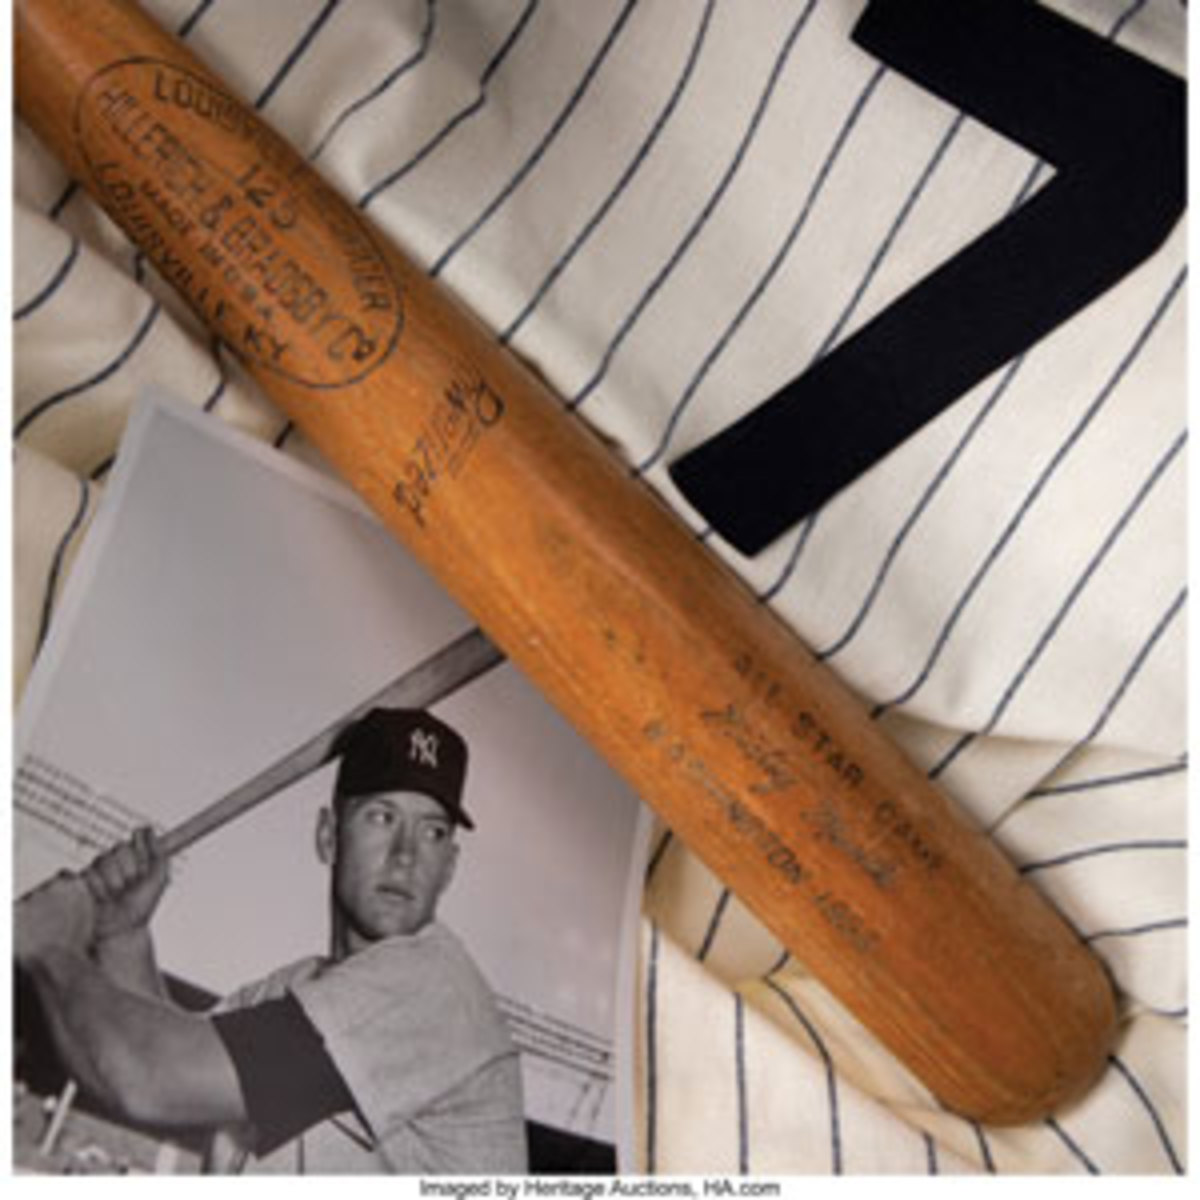  A 1956 Mickey Mantle All-Star Game-used bat, PSA/DNA GU 9.5., sold for $384,000.